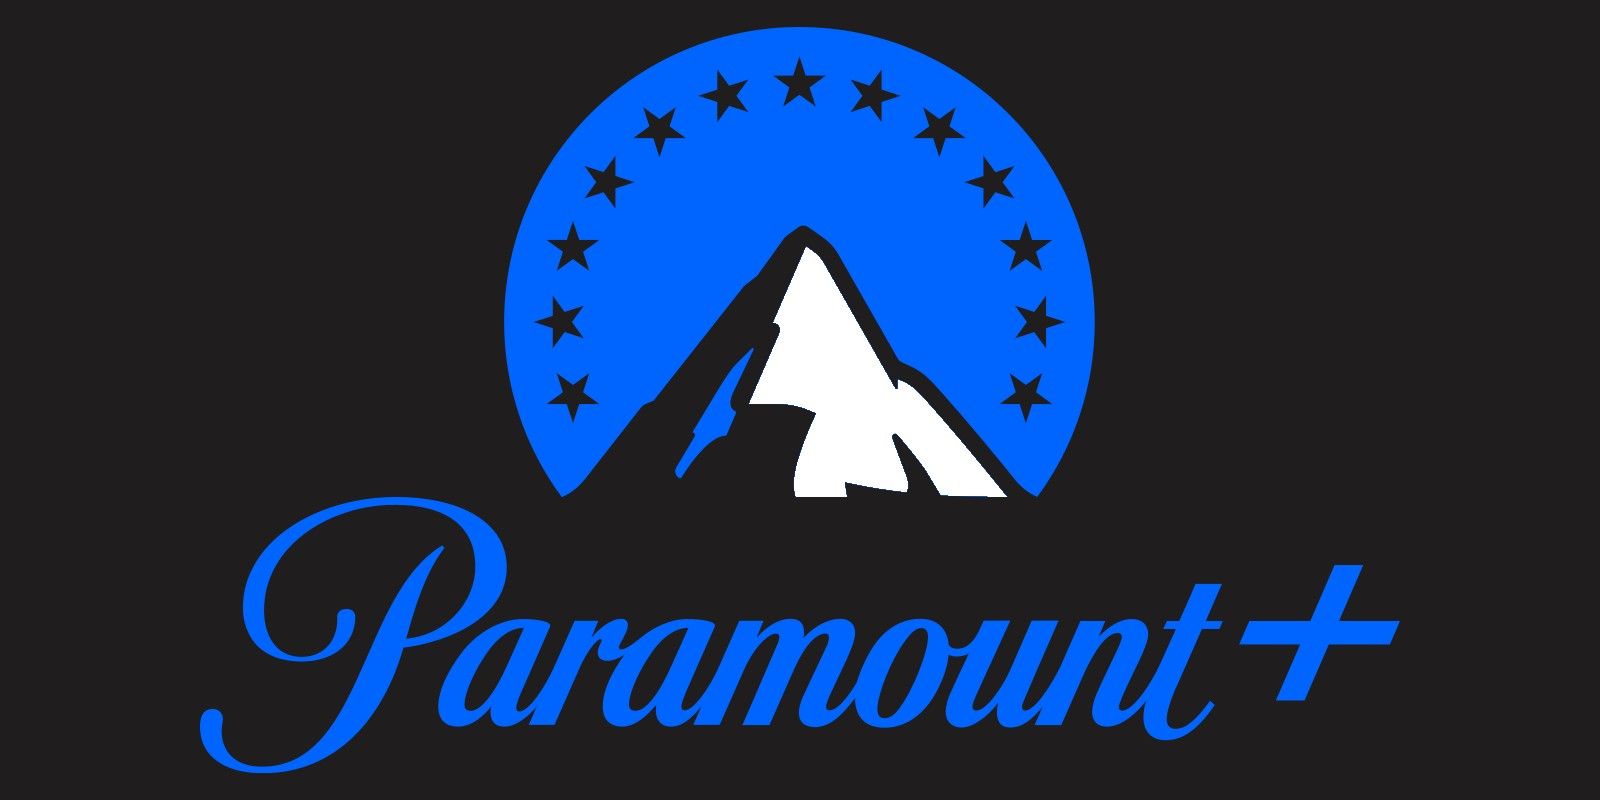 Paramount Plus app can be installed on newer Samsung TVs